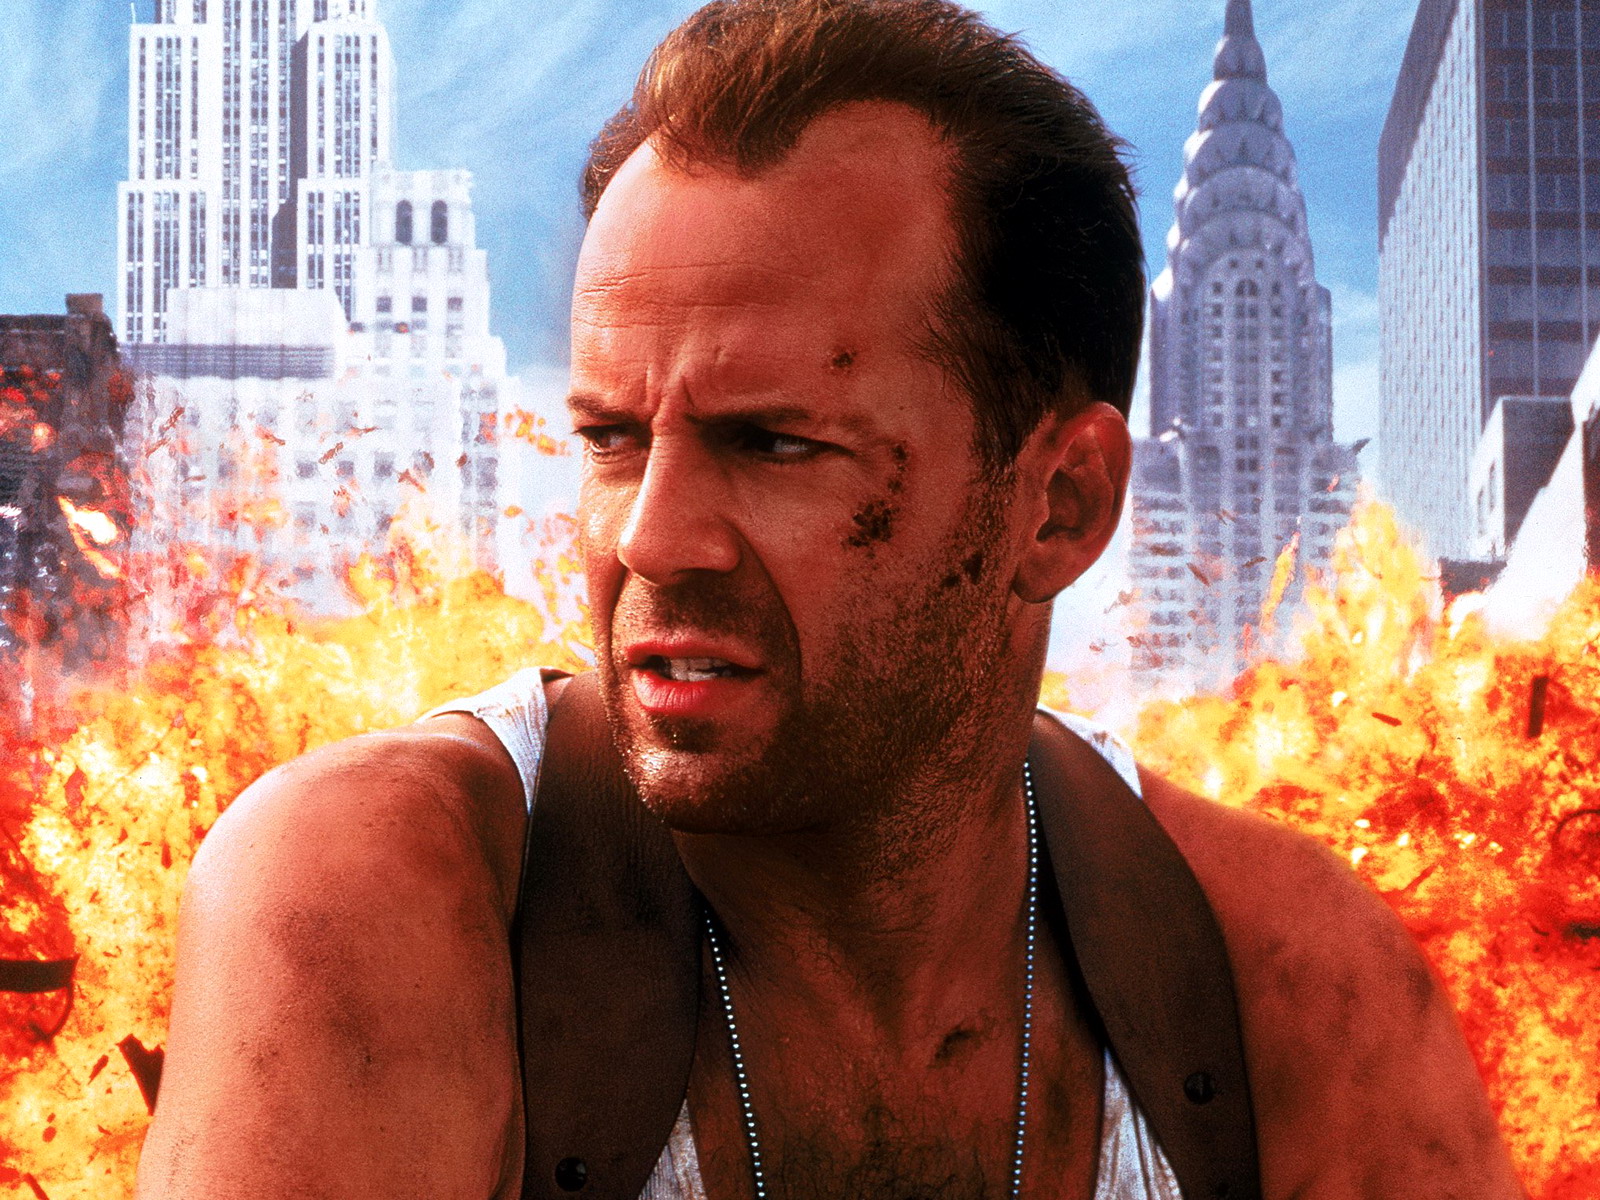 What's Your IQ, Based Only on Your Opinions About Movie… Quiz Die Hard